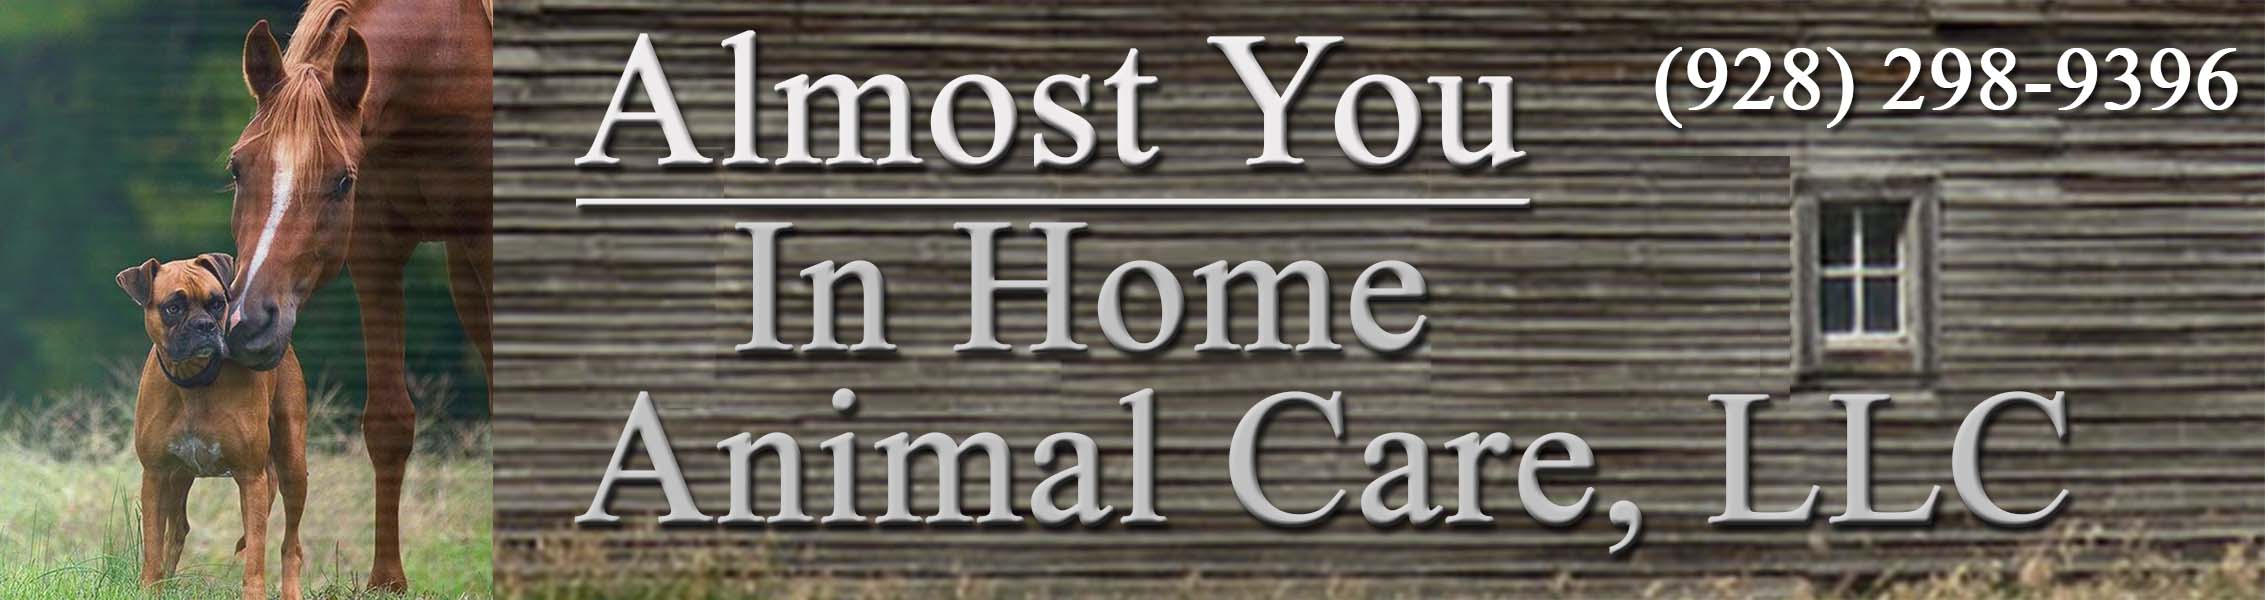 Almost You Animal Care